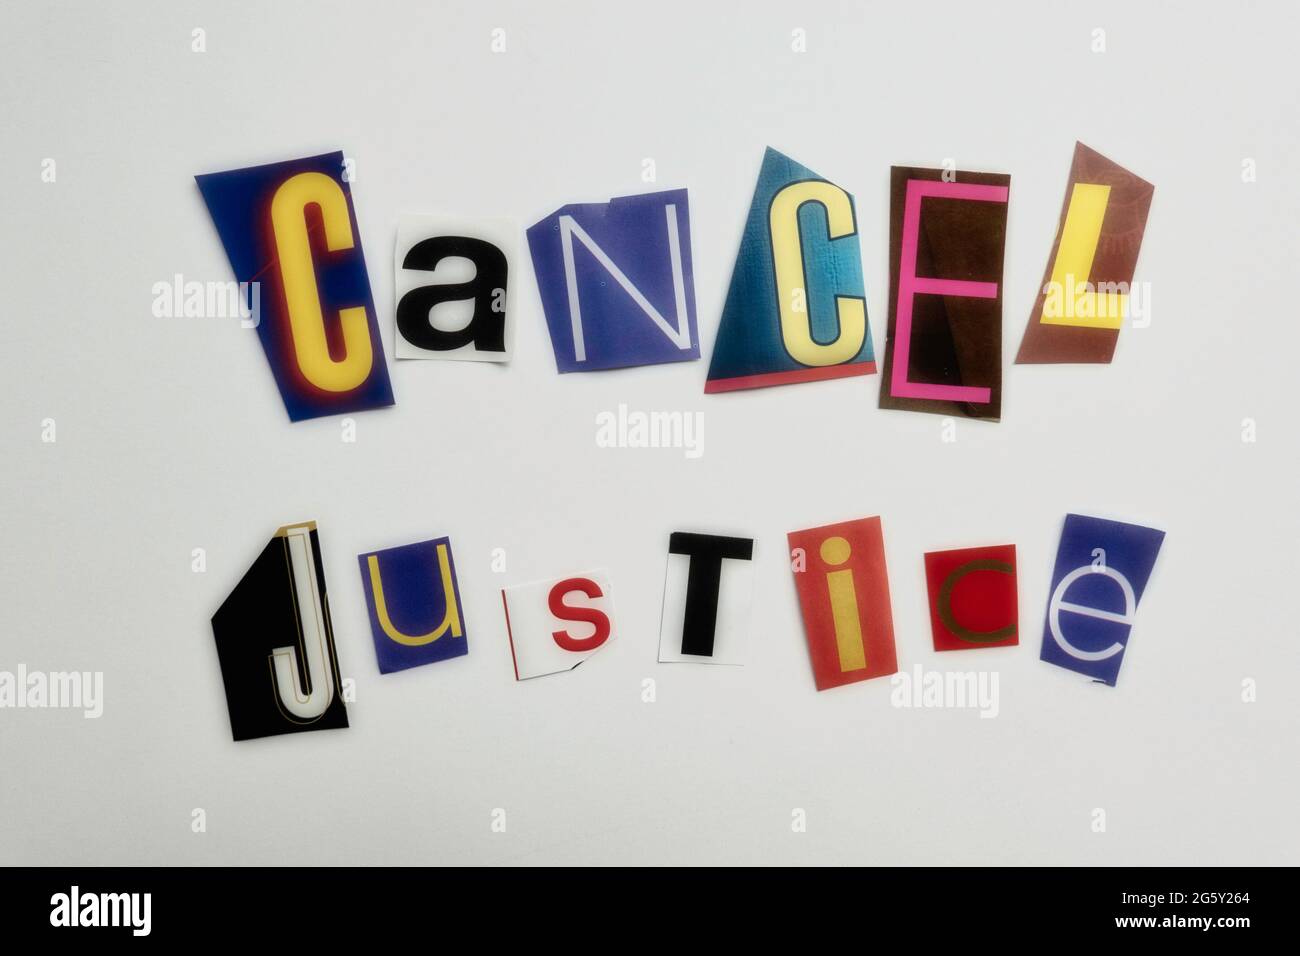 The words 'Cancel Justice' using cut-out paper letters in the ransom note effect typography, USA Stock Photo